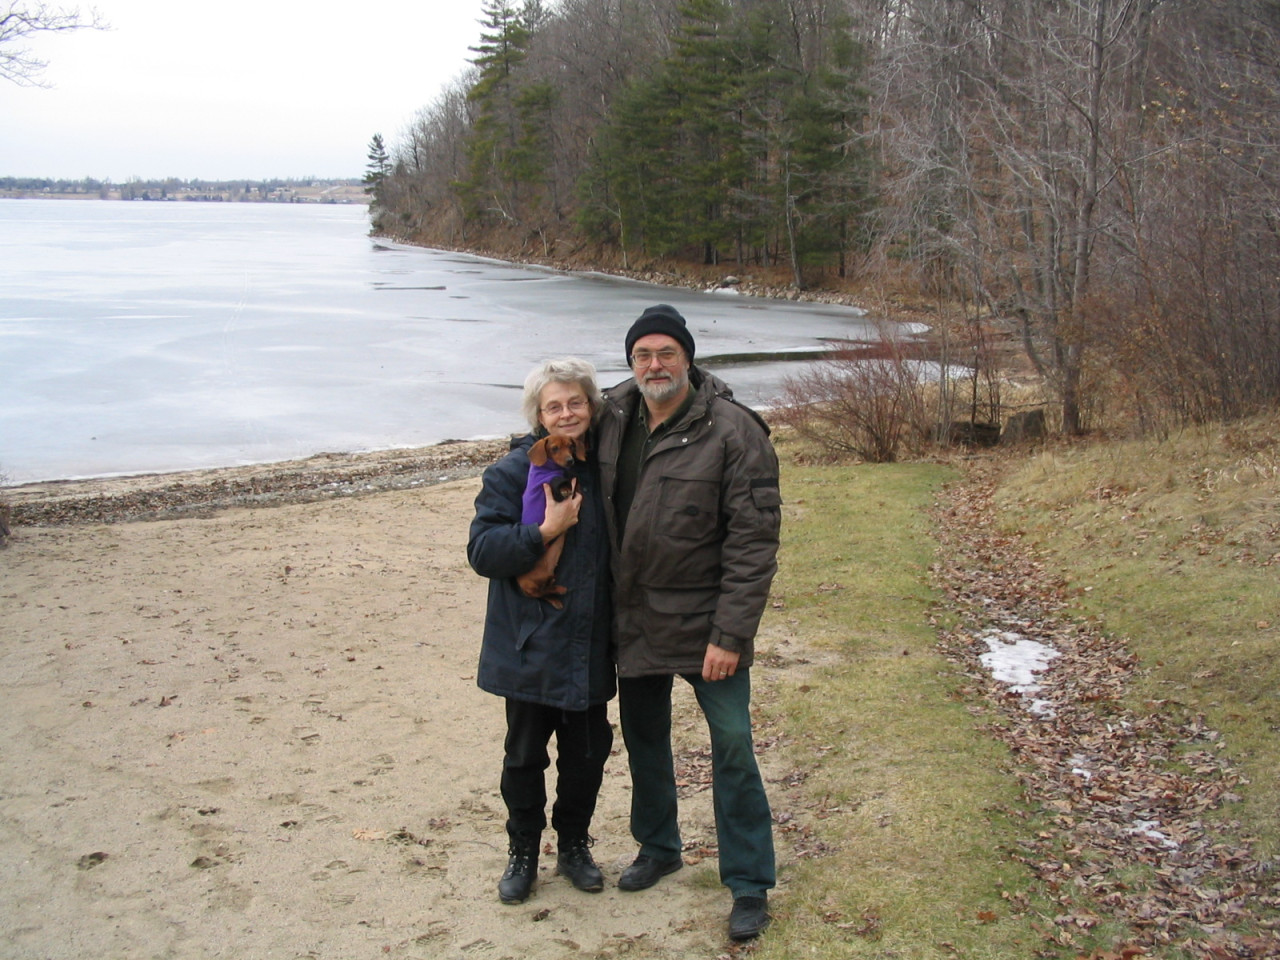 A couple poses for the camera on a beach in front of a frozen lake and shoreline